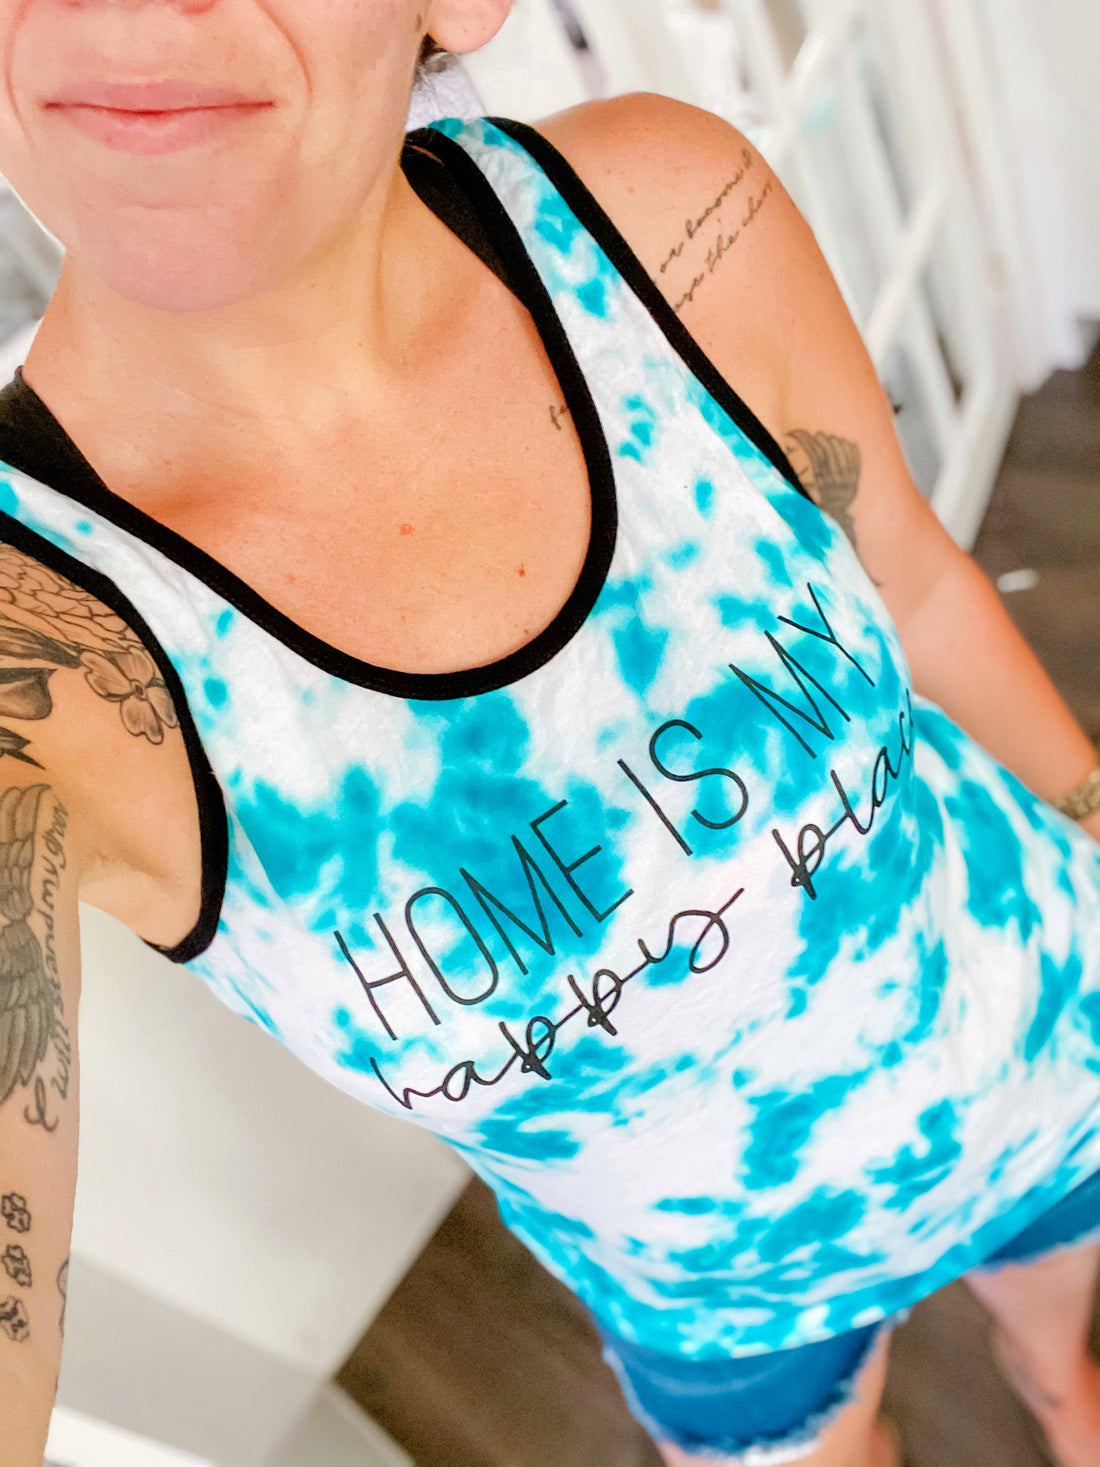 Home is my Happy Place Tank [ships in 3-7 business days]